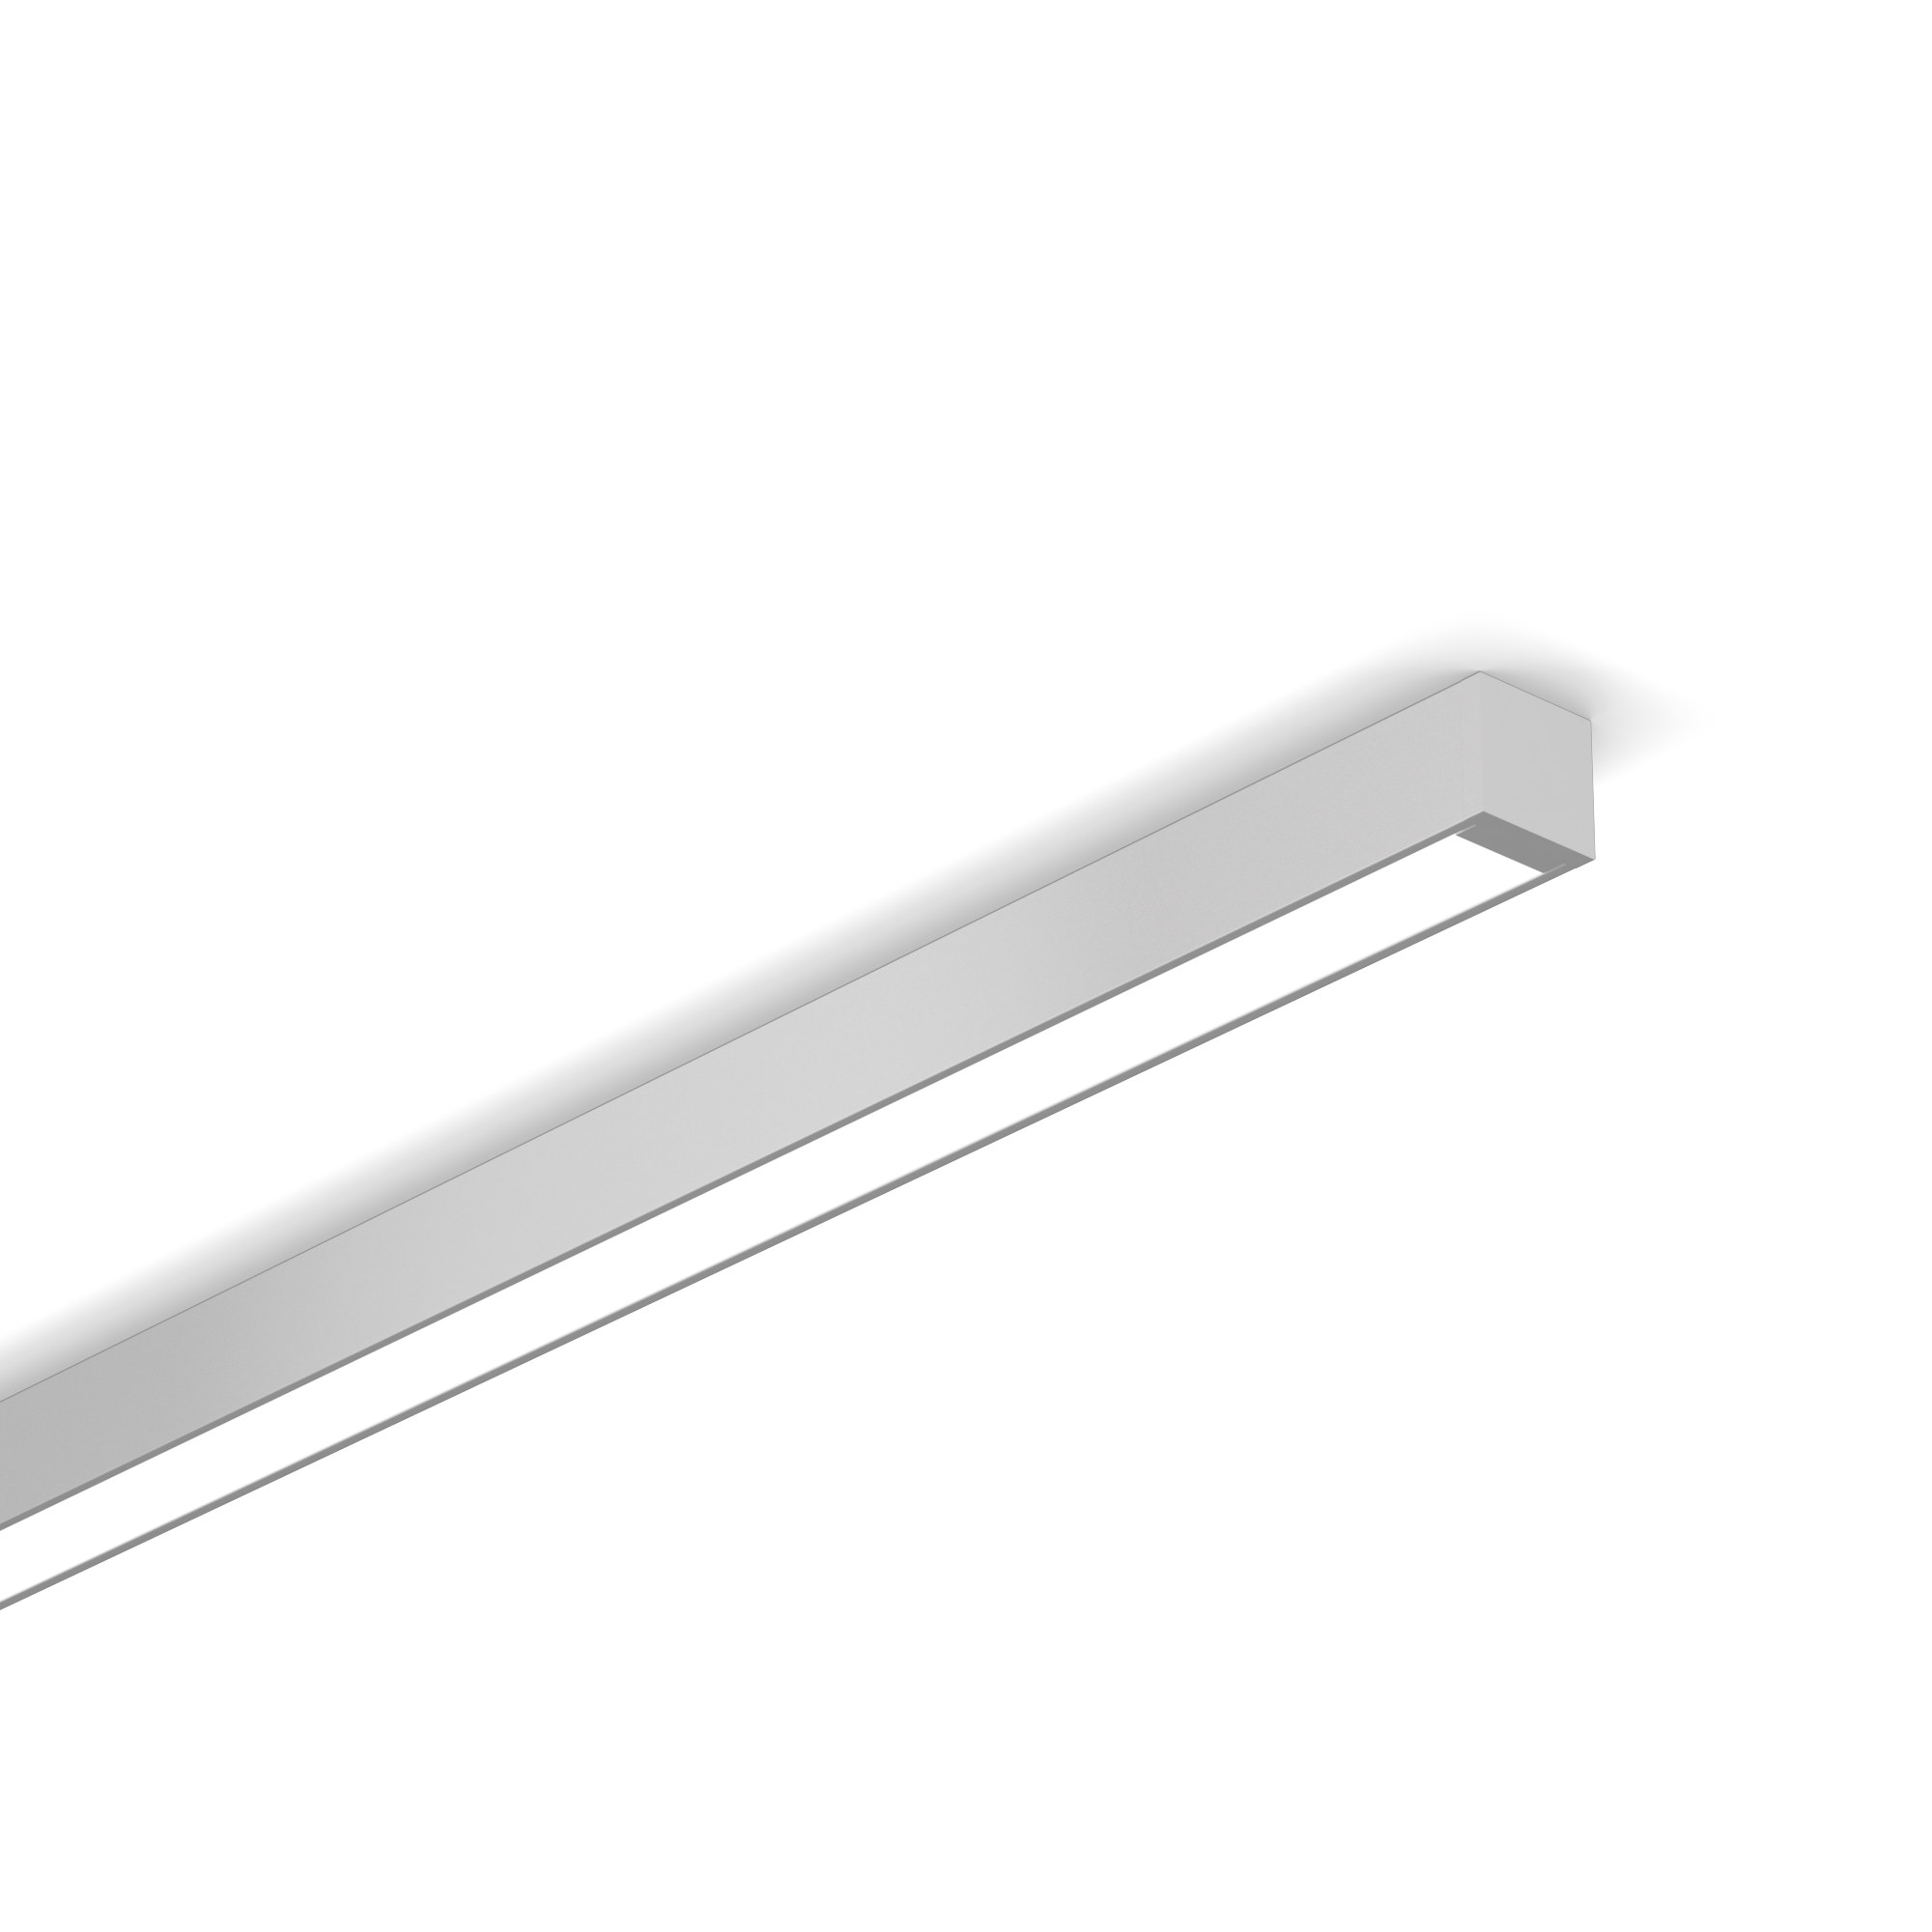 0.95” Ultra-Compact Surface Mounted LED Linear
NANOSquare95 Surface is 0.95” square surface mounted LED linear light fixture, bringing SmartBeam® capabilities to a graphic scale that complements architectural space. NANOSquare95 Surface features a remote driver and 